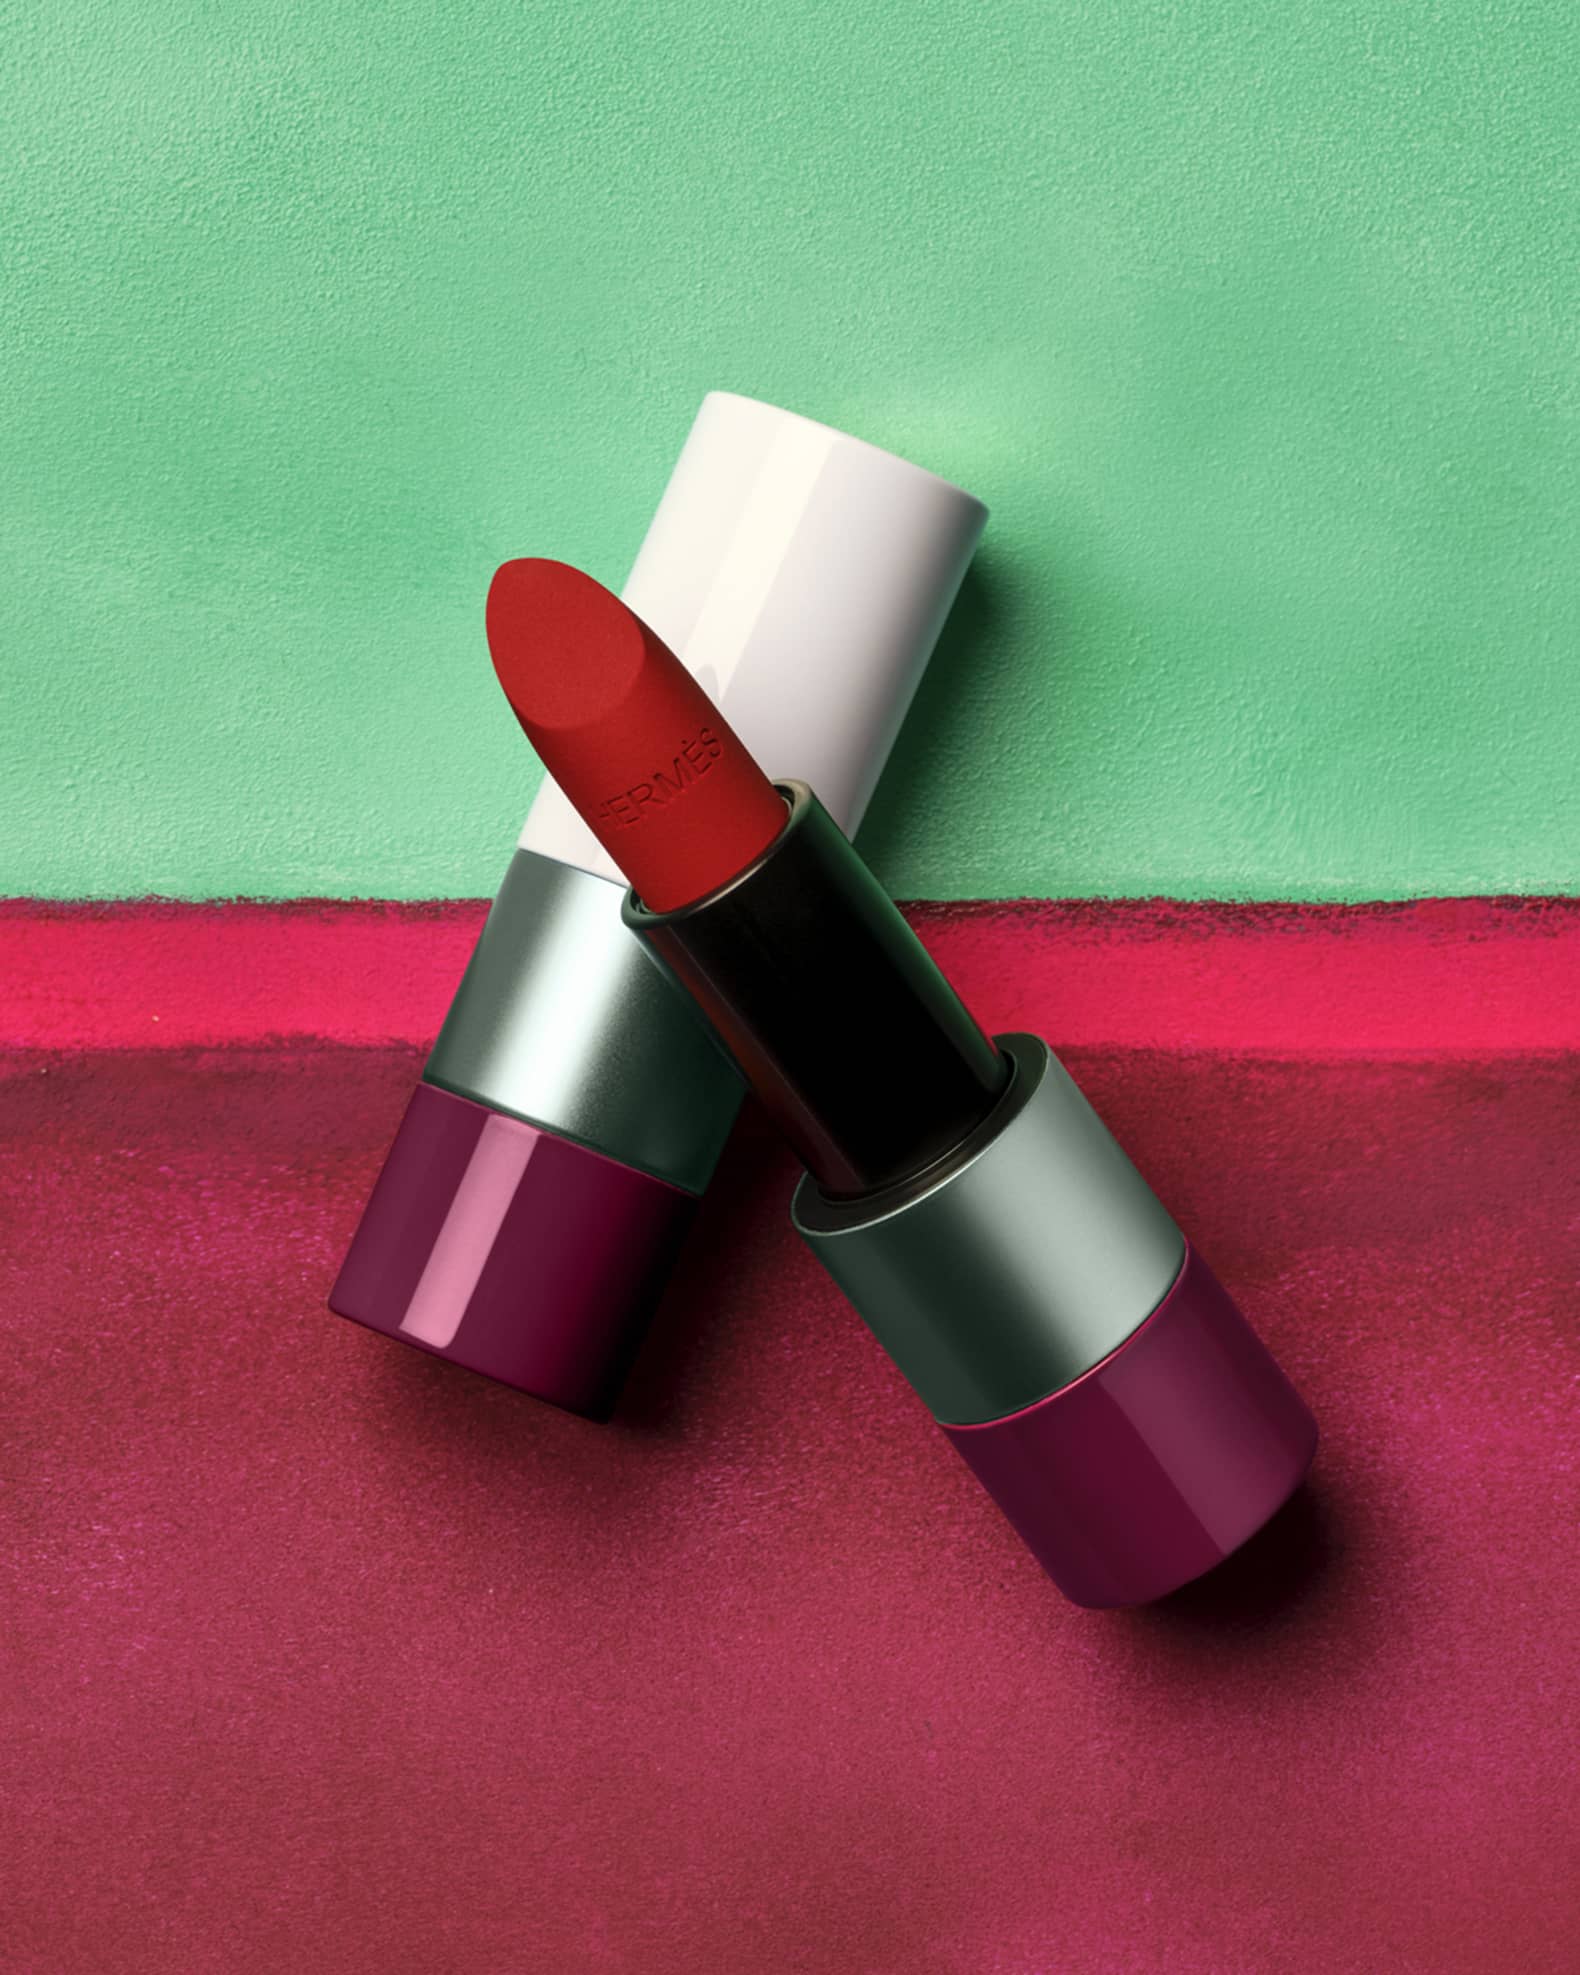 Limited edition - Rouge Hermès: Lipstick, matte and satin